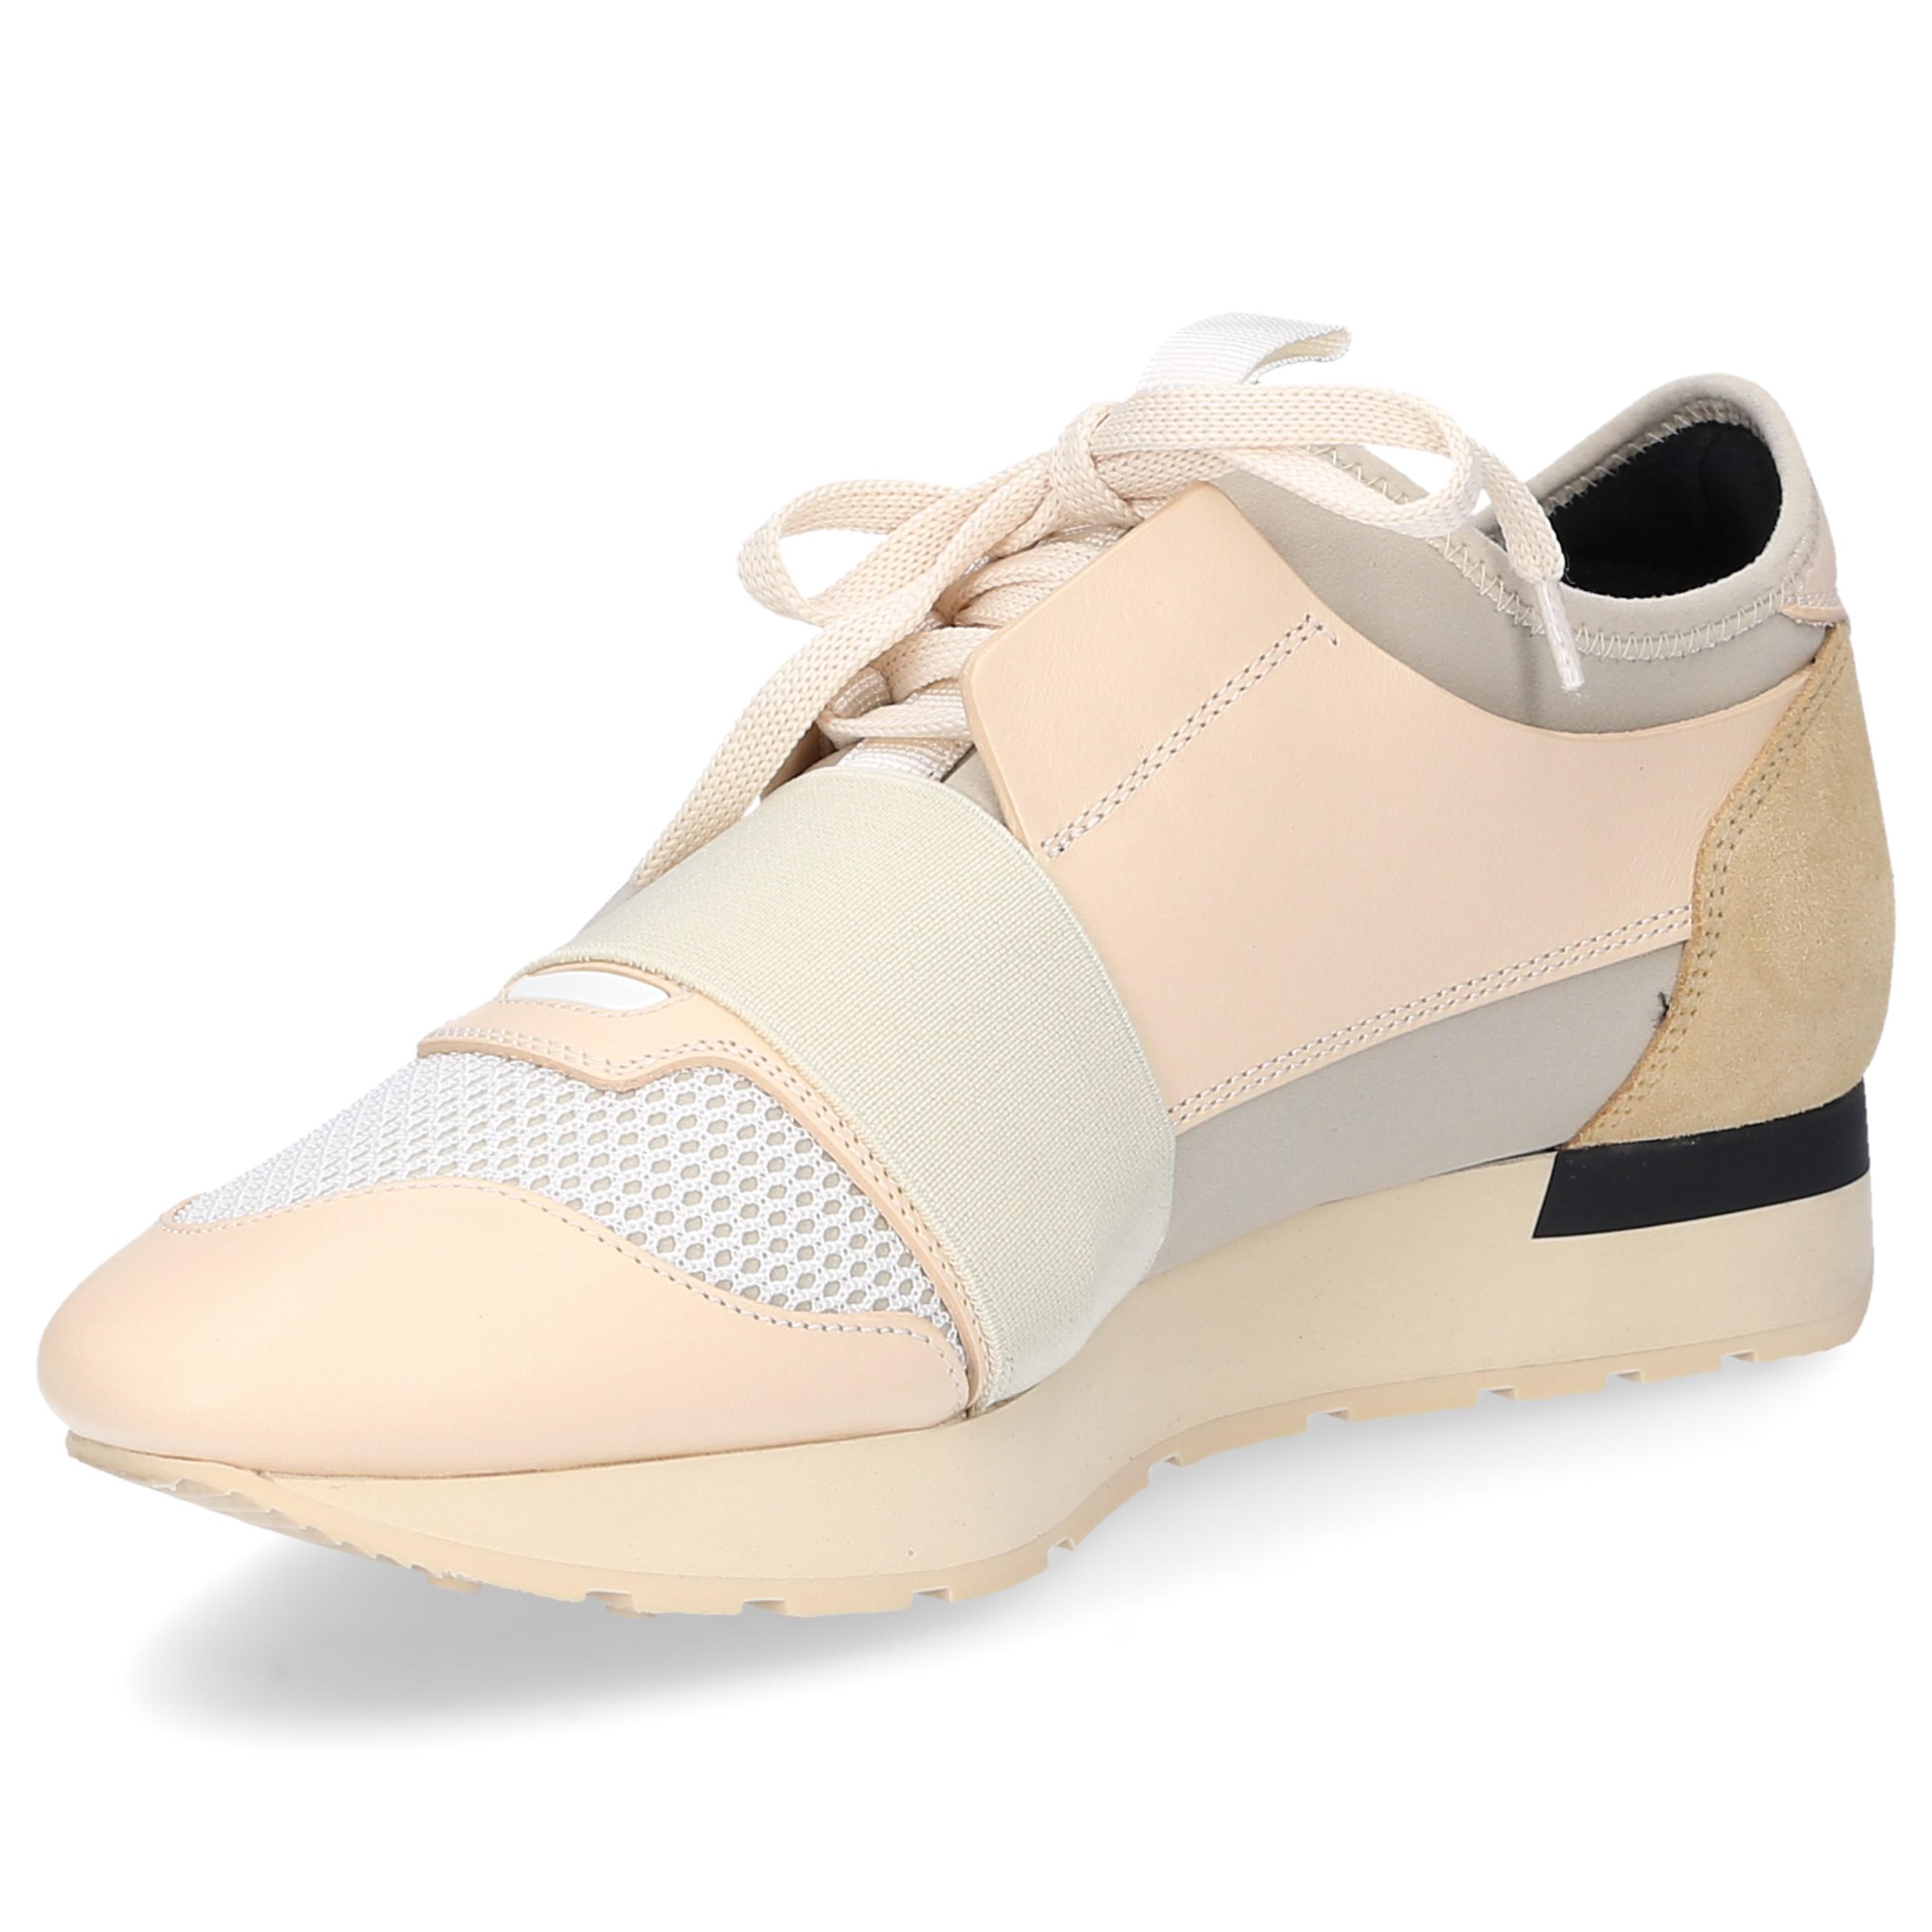 Balenciaga Race Runner Leather, Suede, Mesh And Neoprene Sneakers in Beige  (Natural) | Lyst